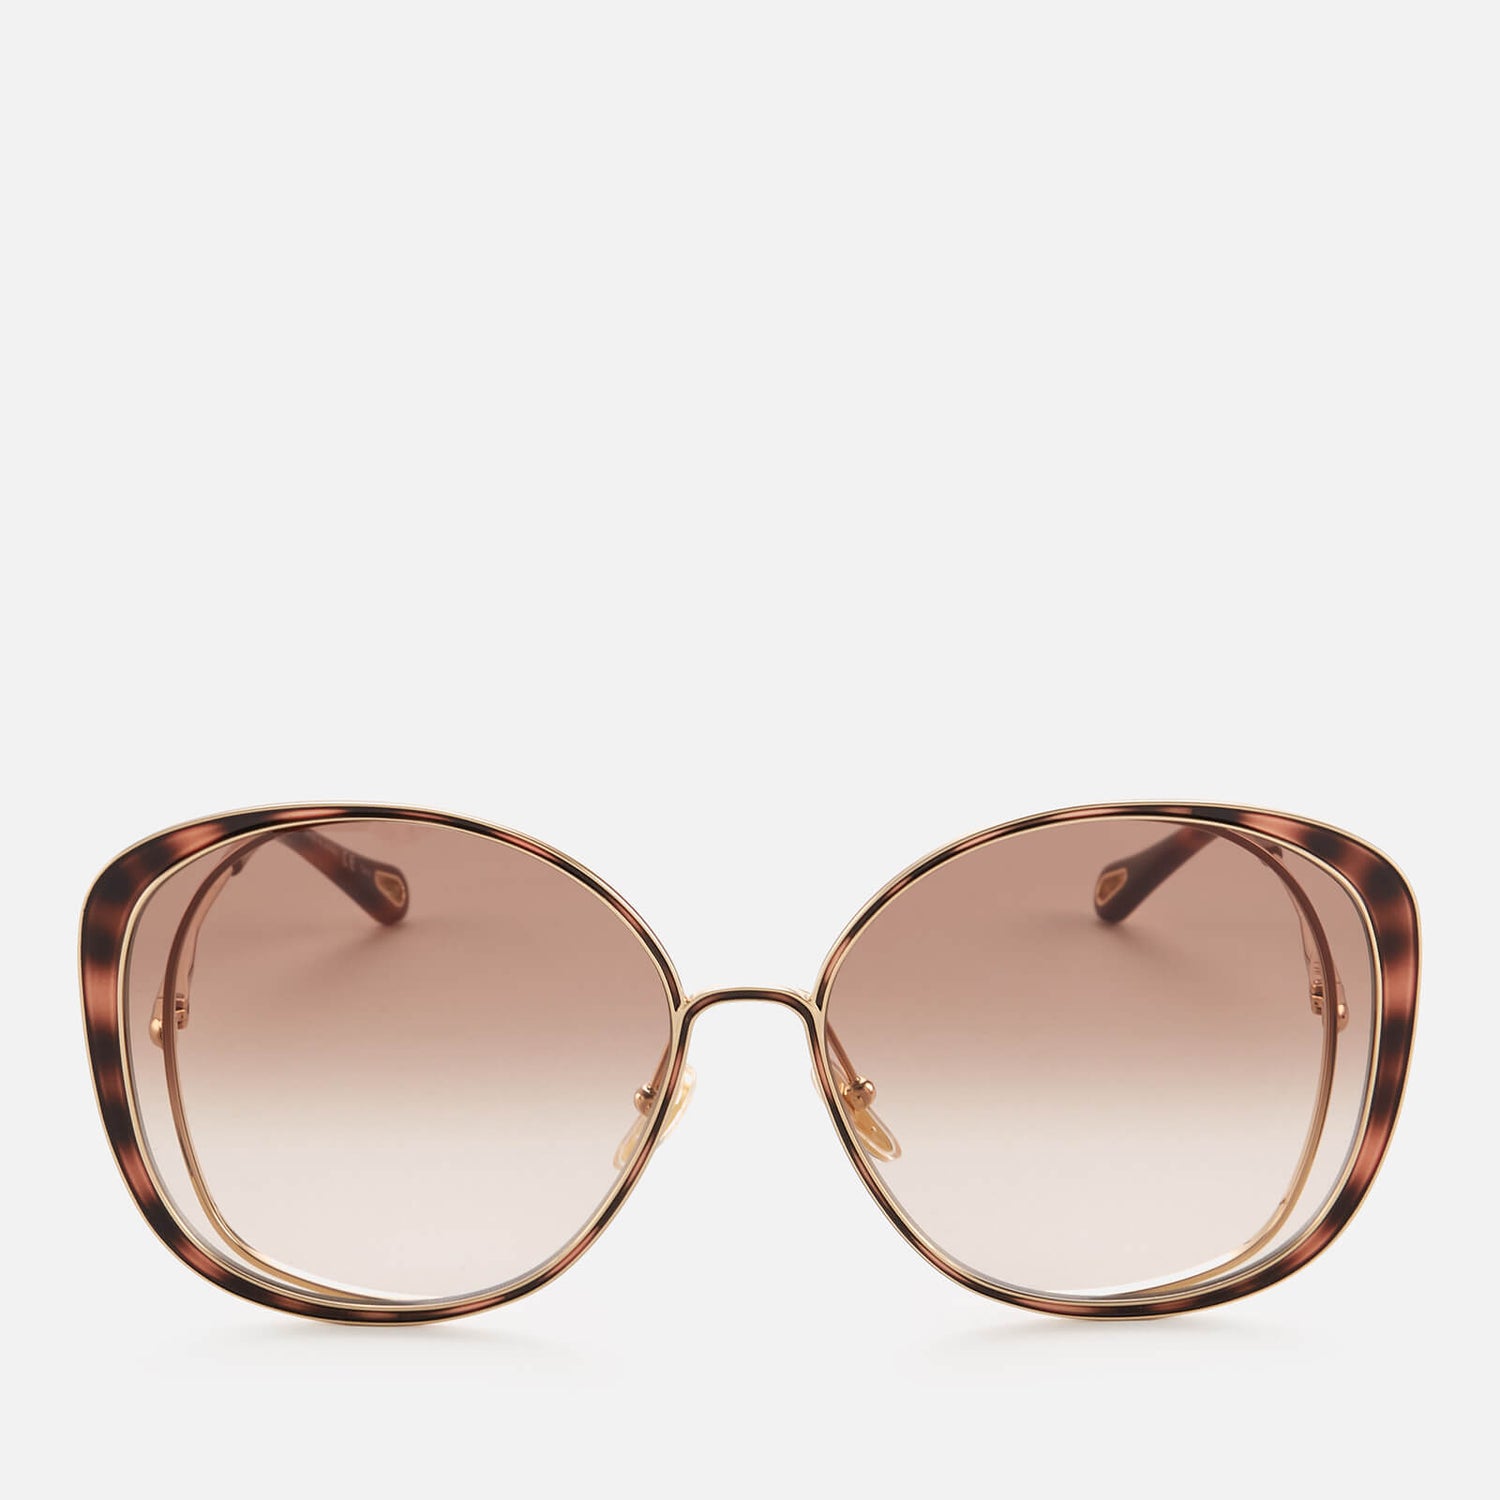 Chloé Women's Oversized Square Cat Eye Sunglases - Gold/Brown